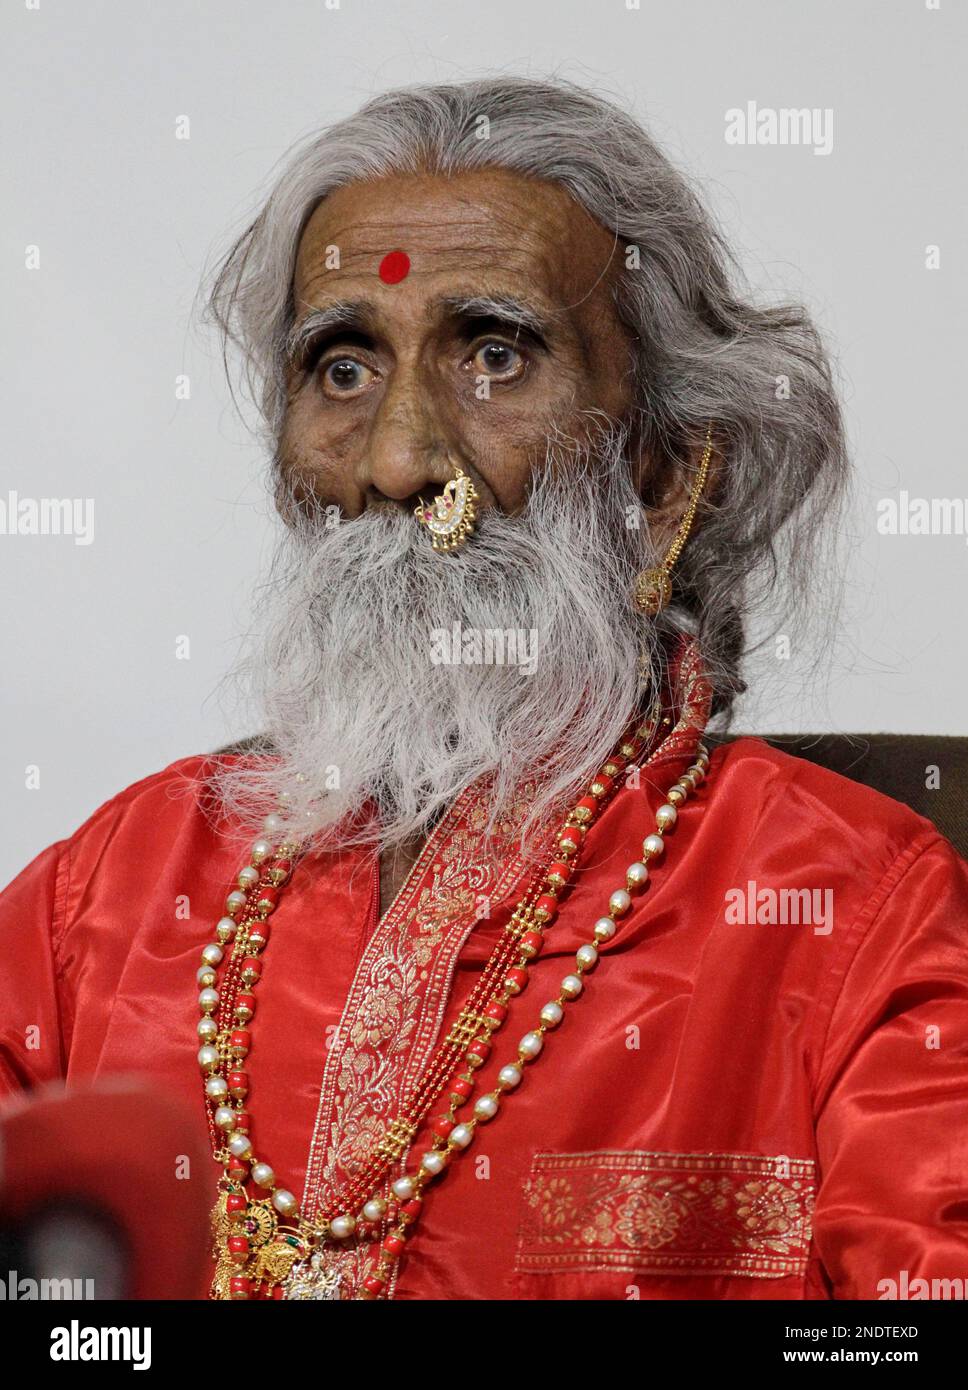 Indian sadhu, or Hindu holy man, Prahlad Jani looks on during an interaction with the press at a hospital in Ahmadabad, India, Thursday, May 6, 2010. Jani, 82, claims to have spent seven decades surviving without food and water and not passing urine and stool and is currently under observation by Indian military scientists and doctors in a private hospital. (AP Photo/Ajit Solanki) Stock Photo